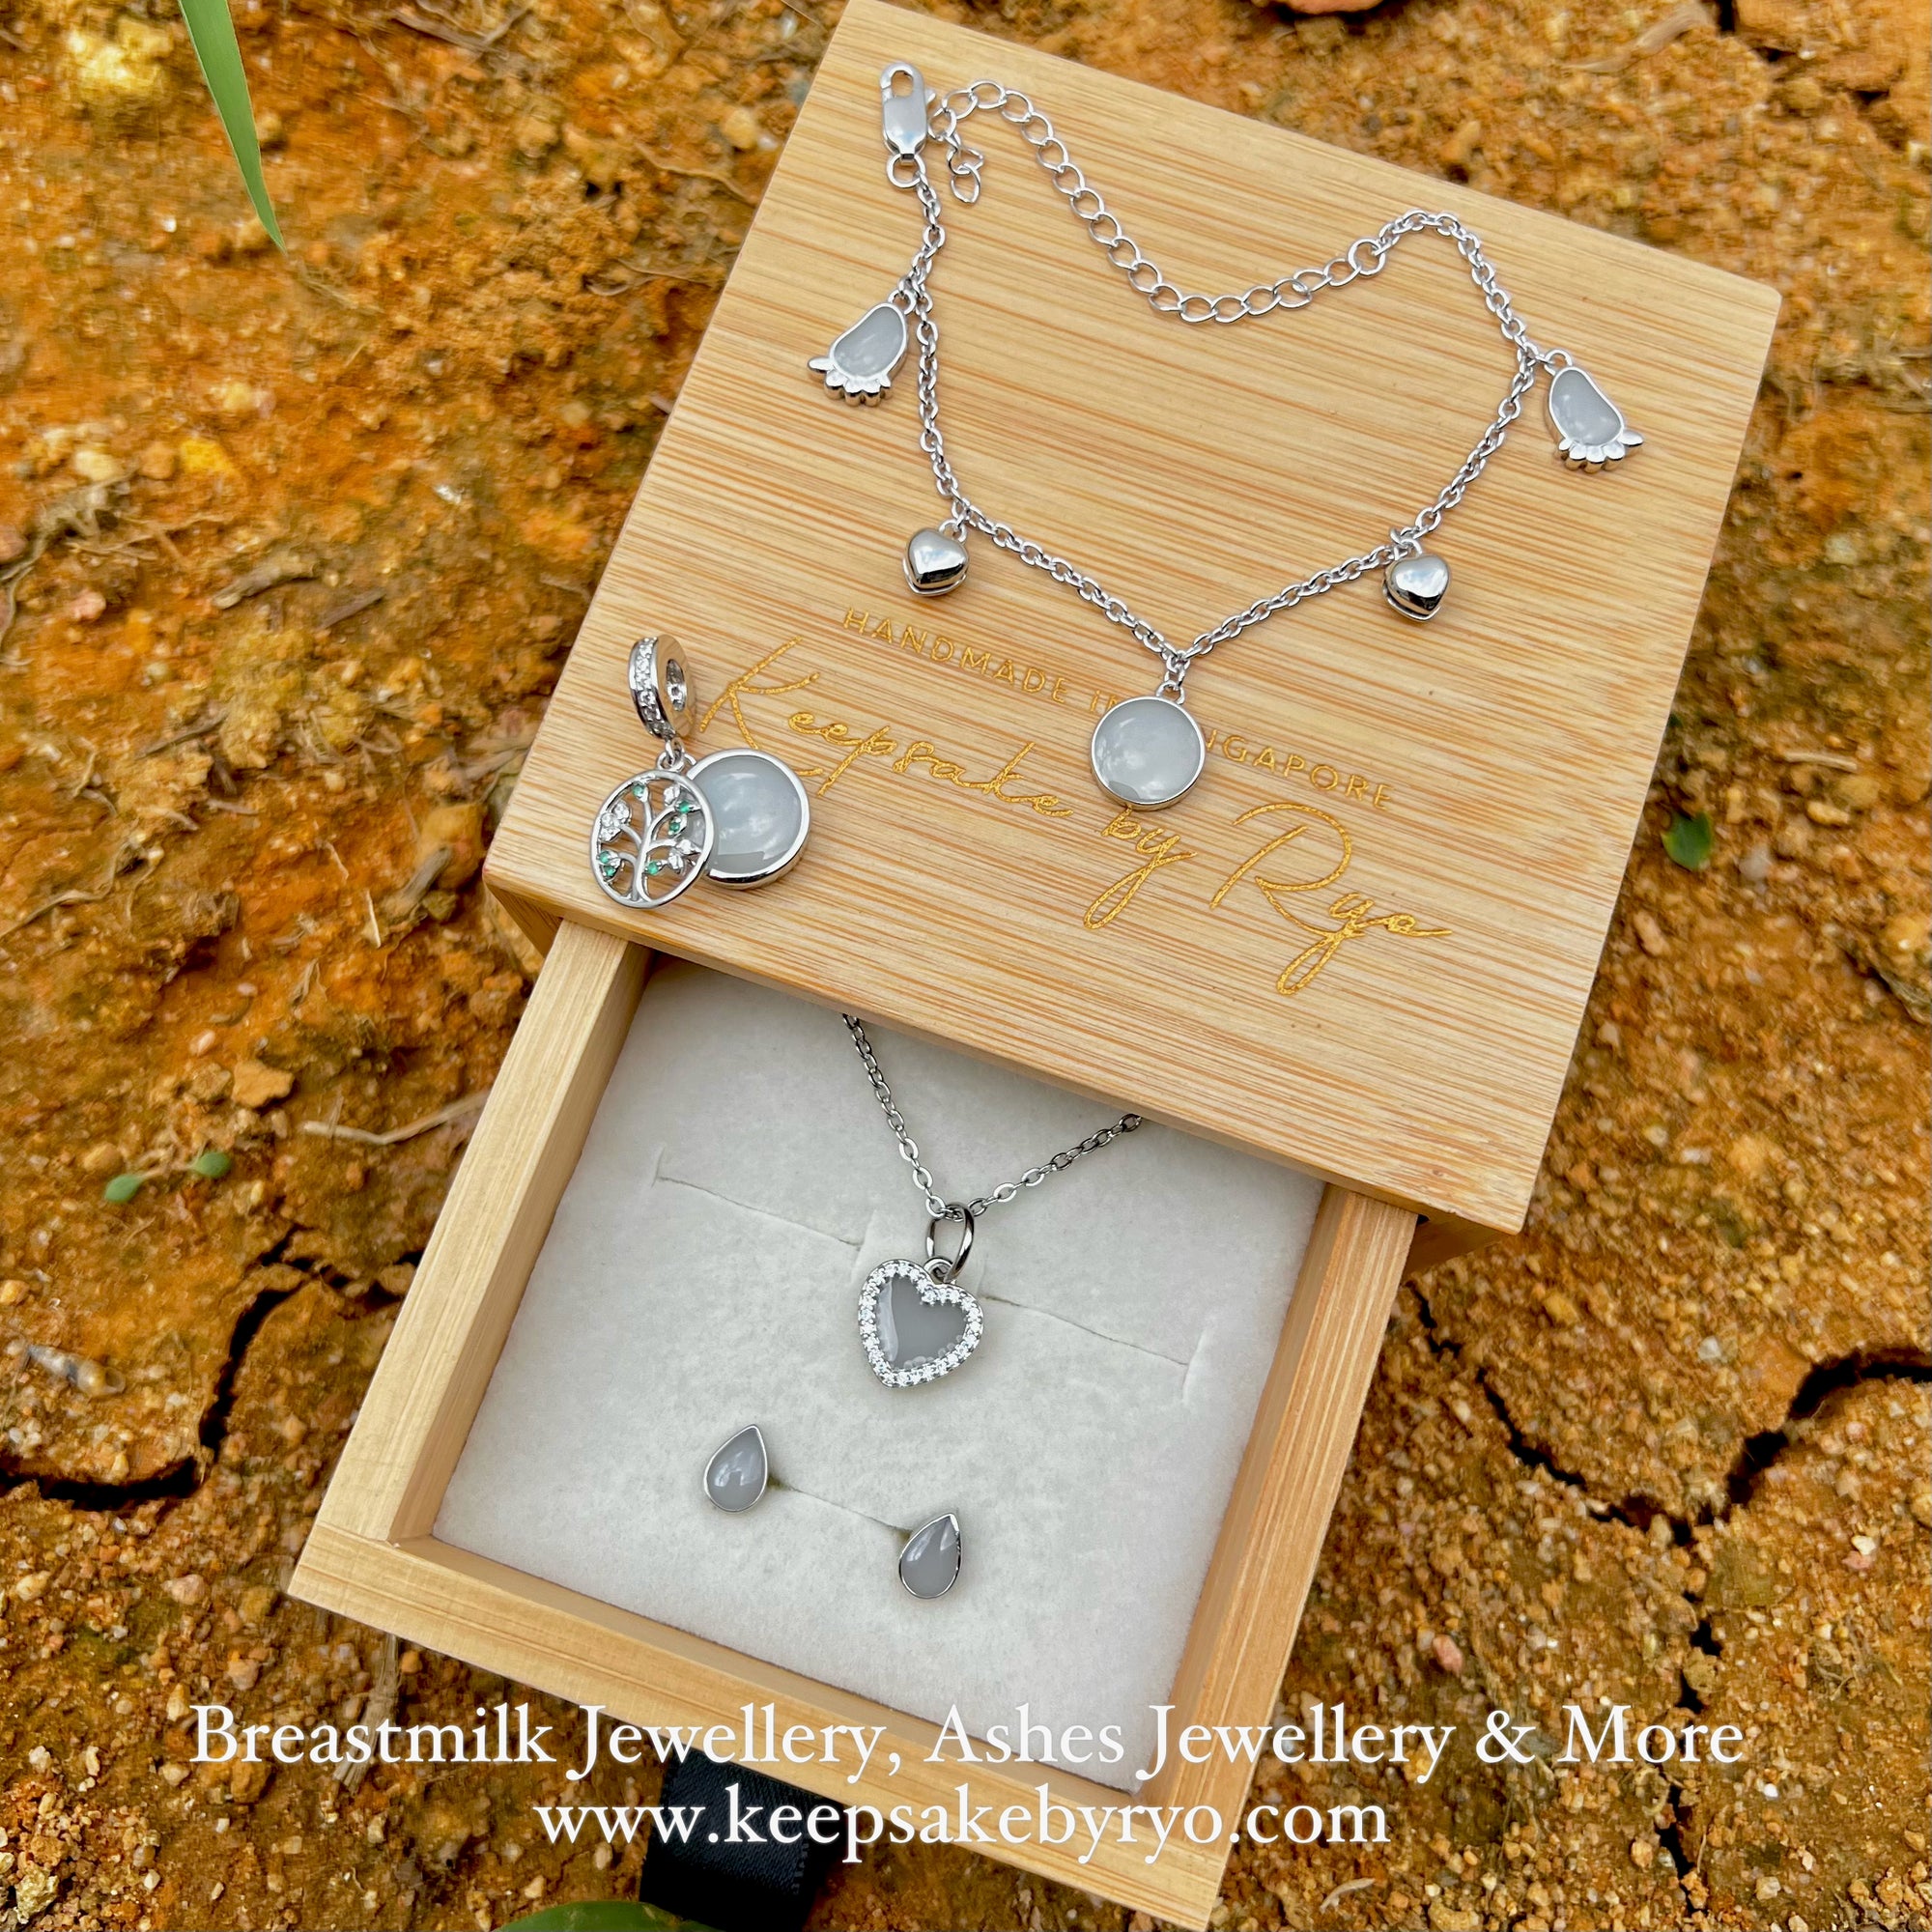 BREASTMILK/ ASHES JEWELLERY WORKSHOP: 4 TOUCHES OF LOVE SILVER PACKAGE